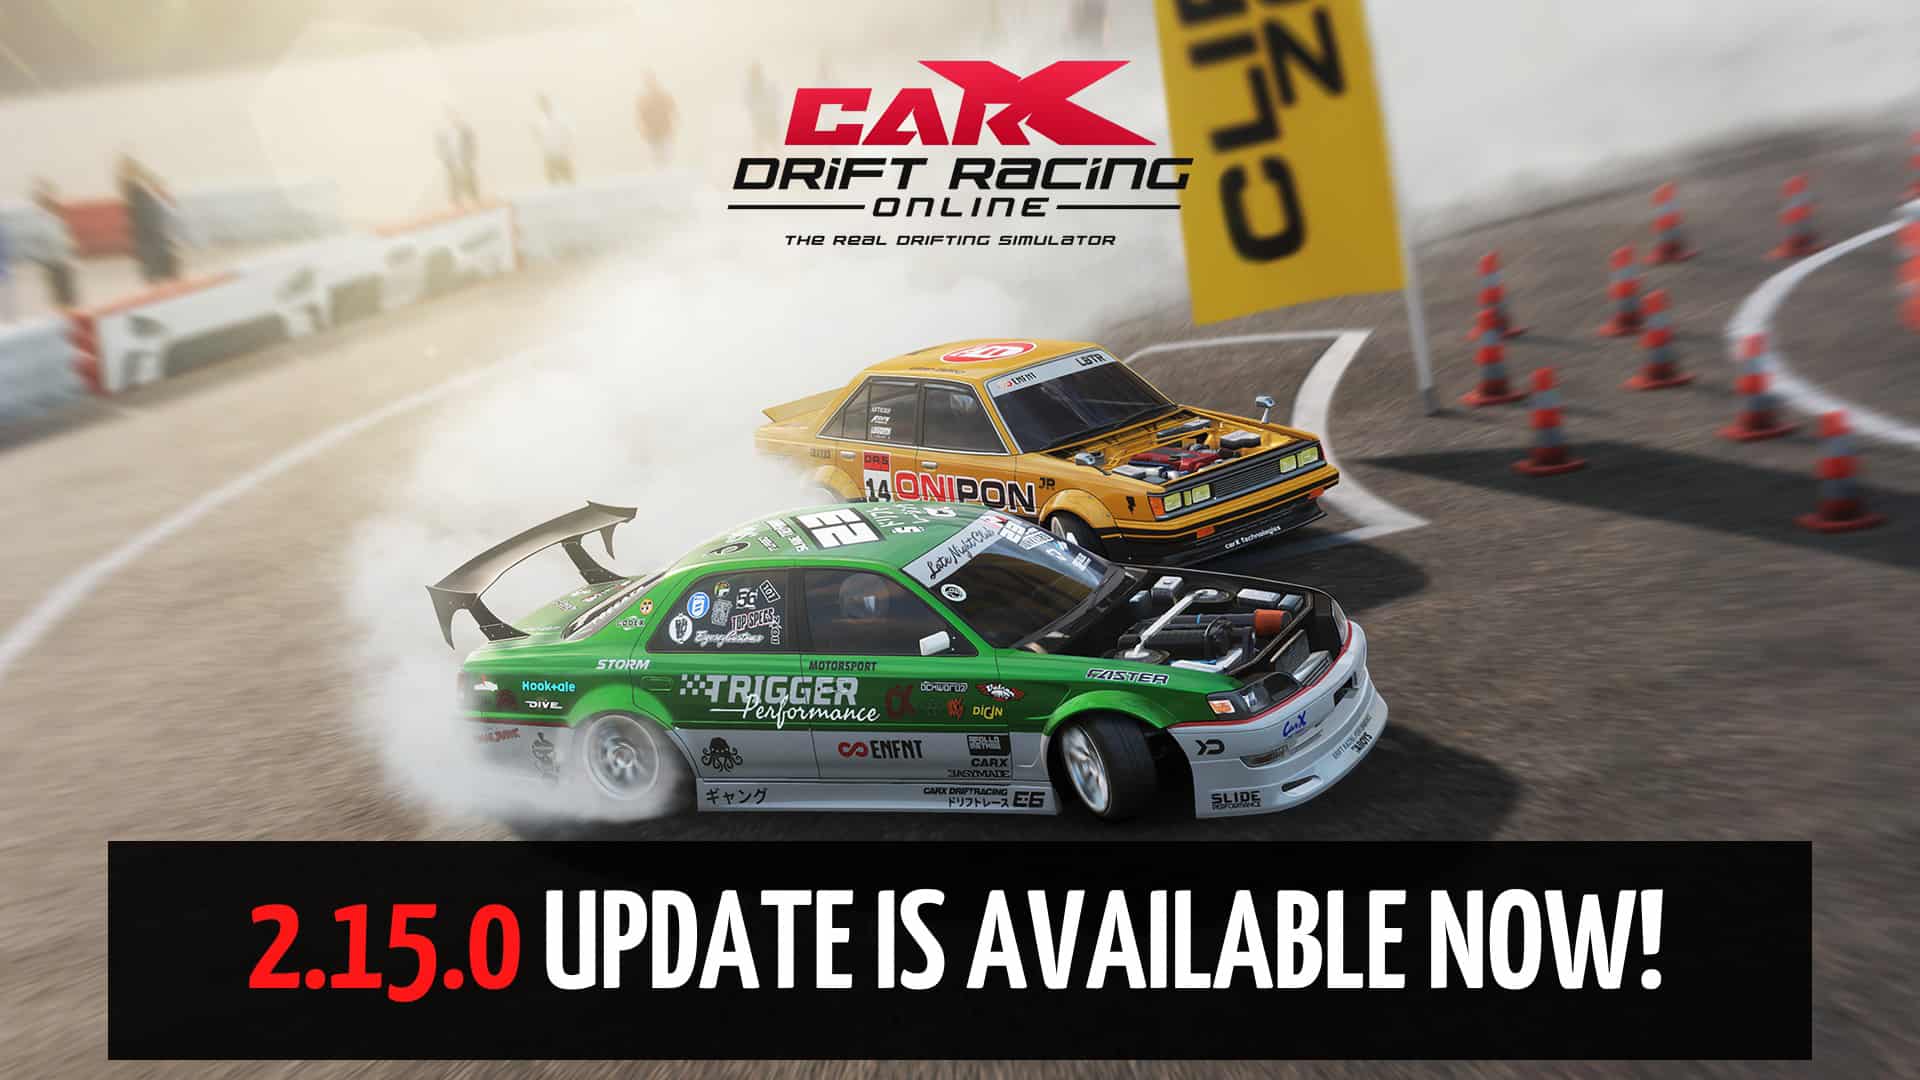 New cars, physics and engine swaps added in CarX Drift Racing Online update 